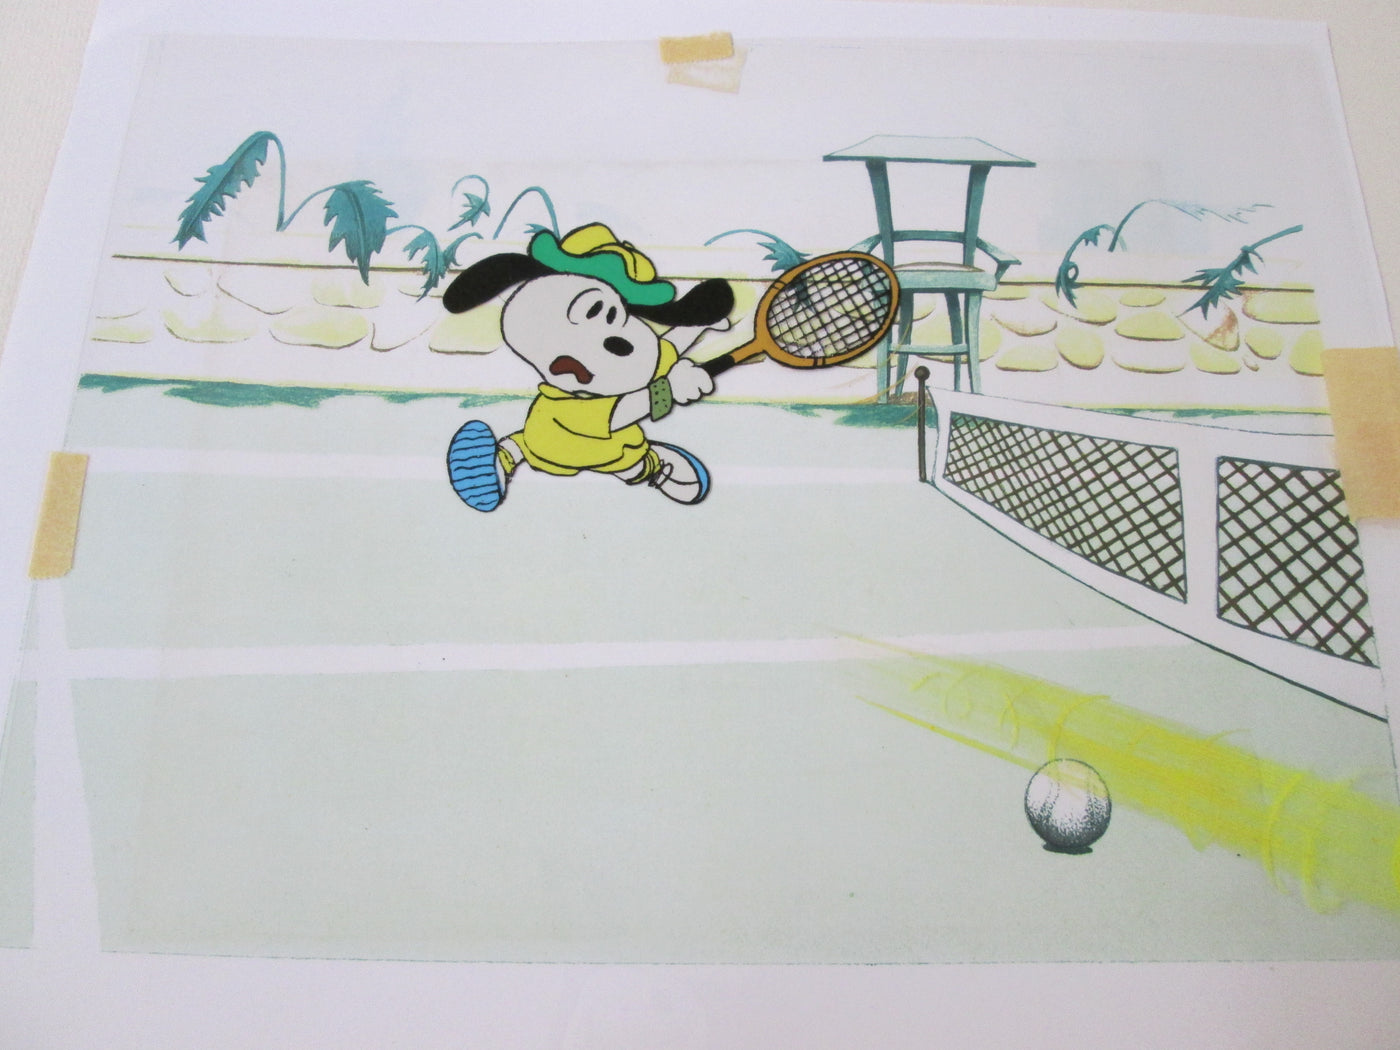 Original Peanuts Production Cel featuring Snoopy from You're a Good Sport, Charlie Brown